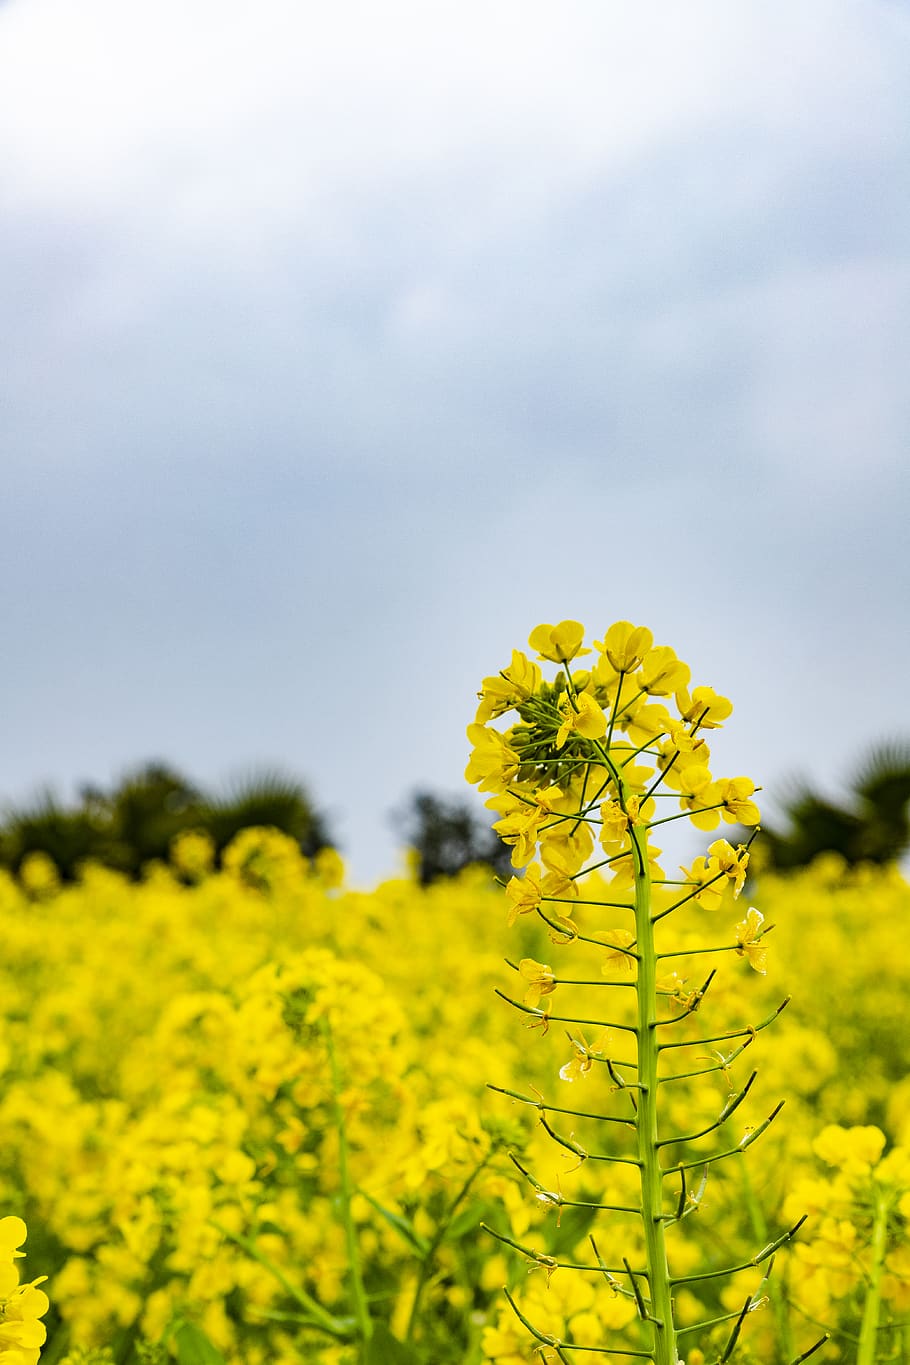 yellow-petaled flower, field, plant, nature, food, outdoors, grassland